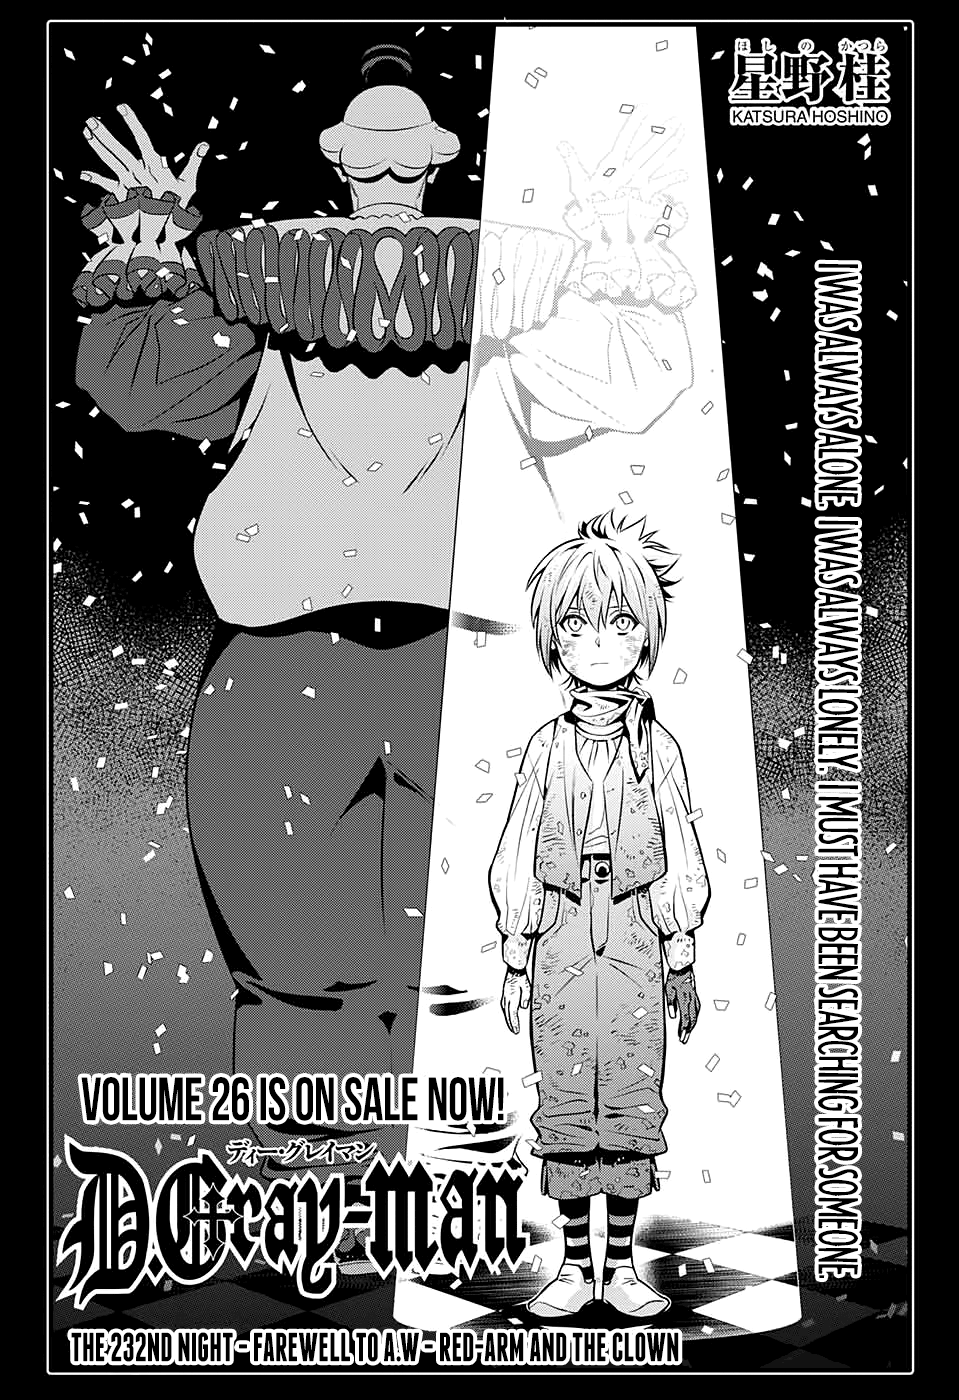 D.Gray-man chapter 232 page 10